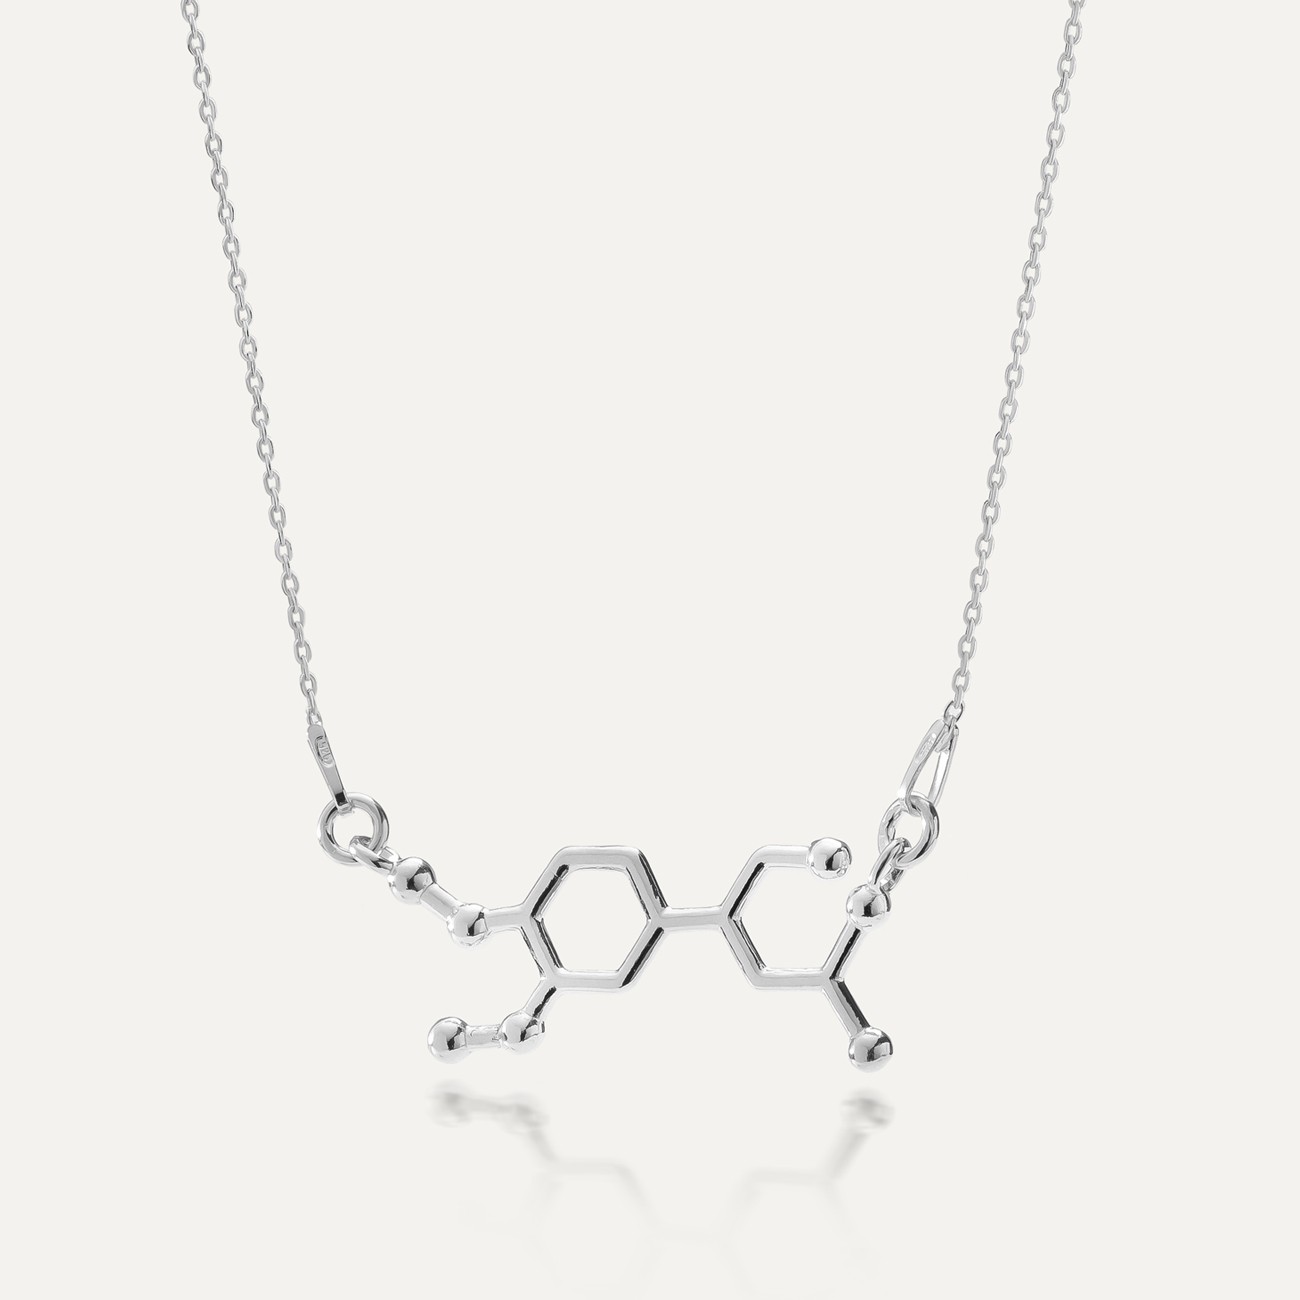 NECKLACE VITAMIN C CHEMICAL FORMULA, STERLING SILVER 925